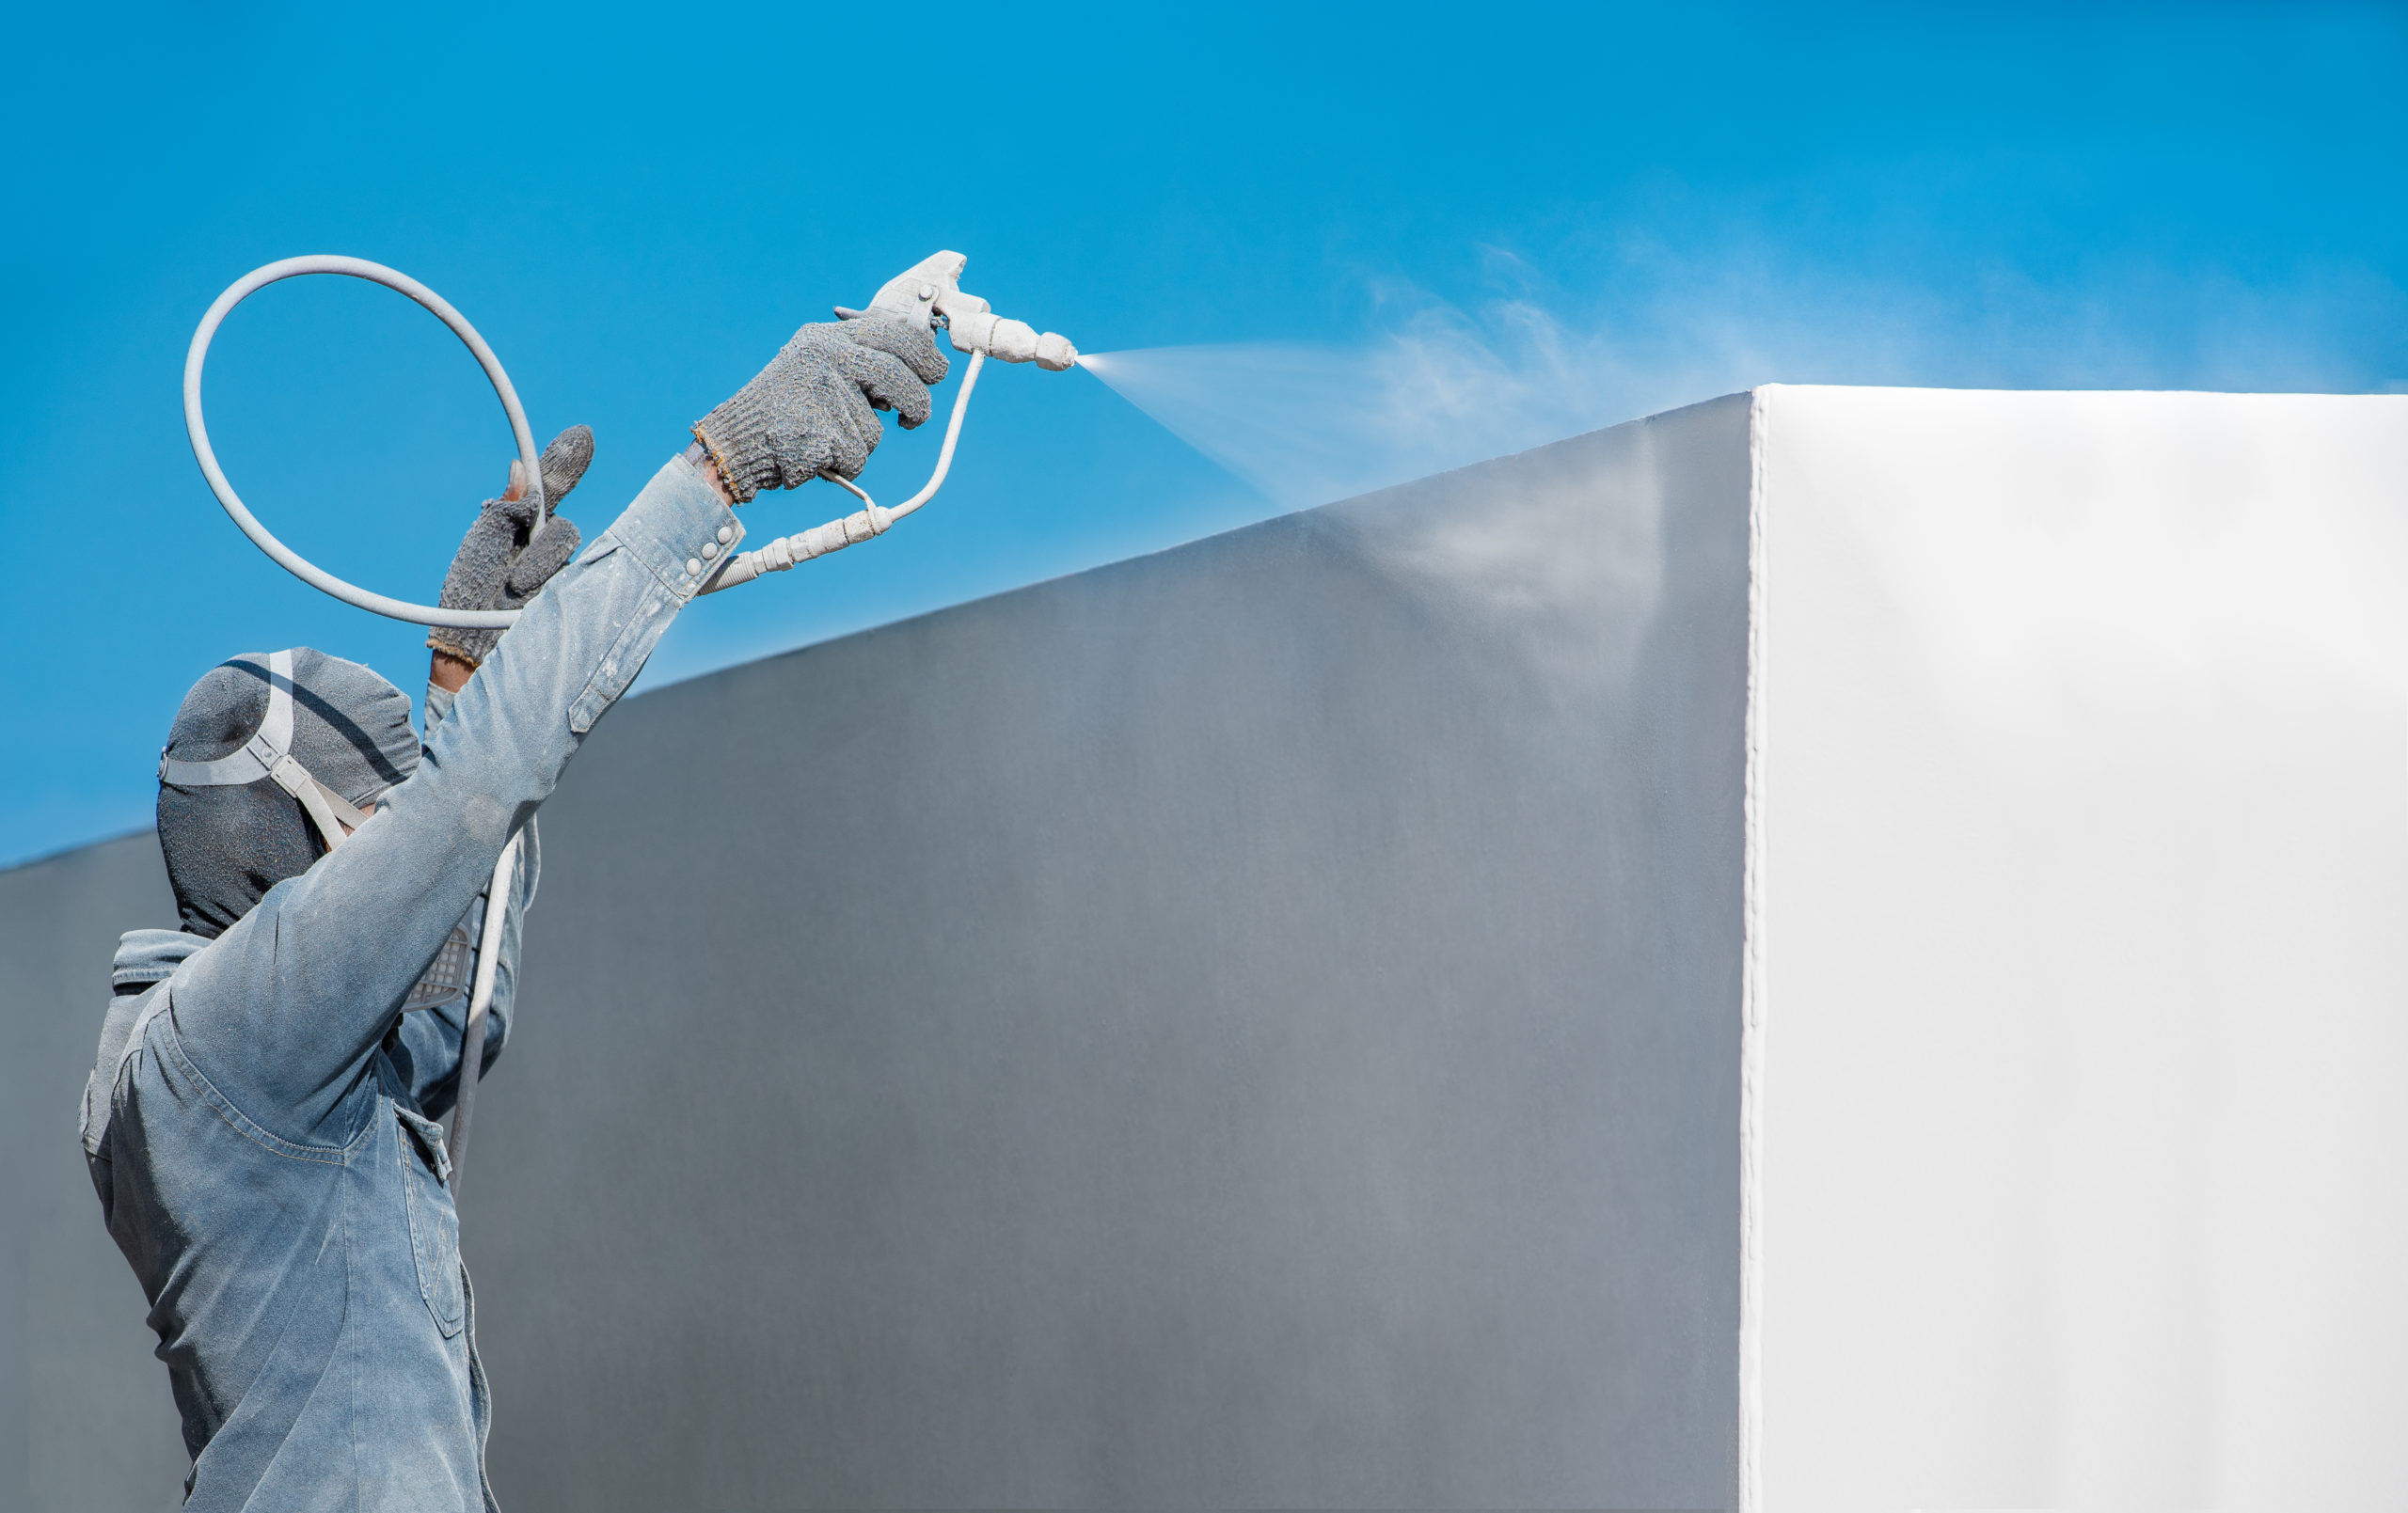 The Top 3 Uses of Protective Coatings And Sealants & Why It’s Important